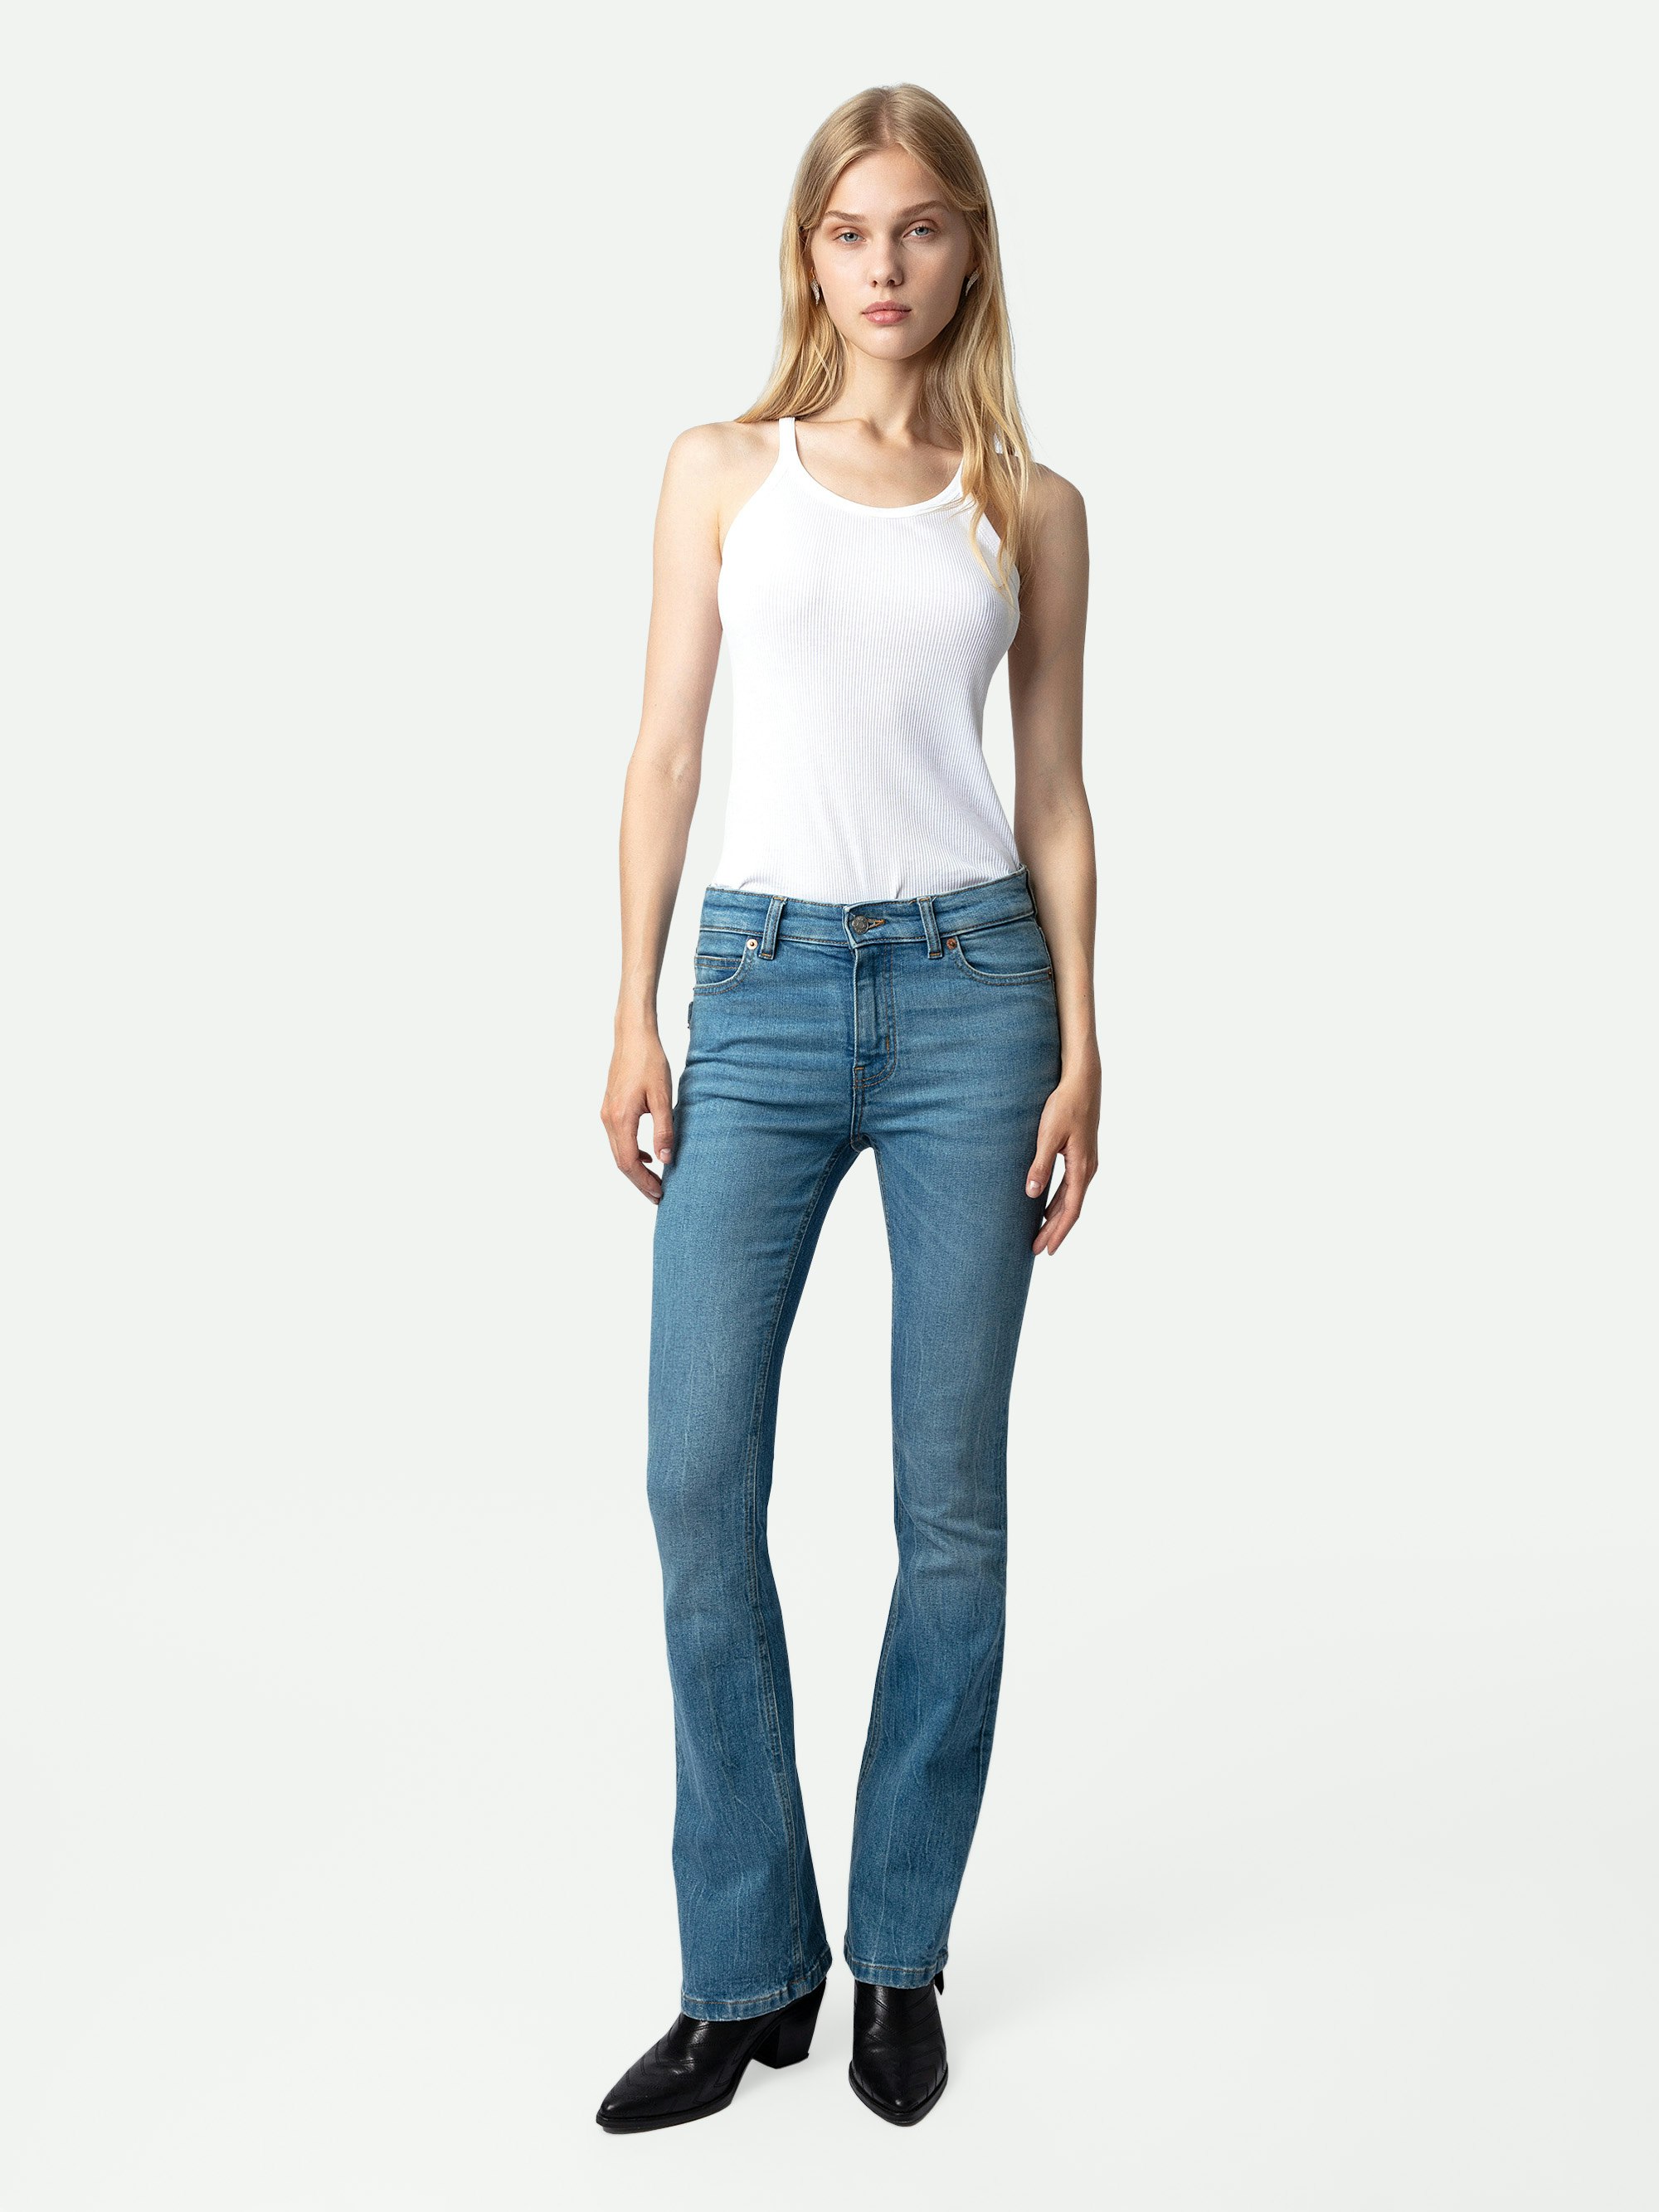 Eclipse Jeans - Women's blue flared jeans.